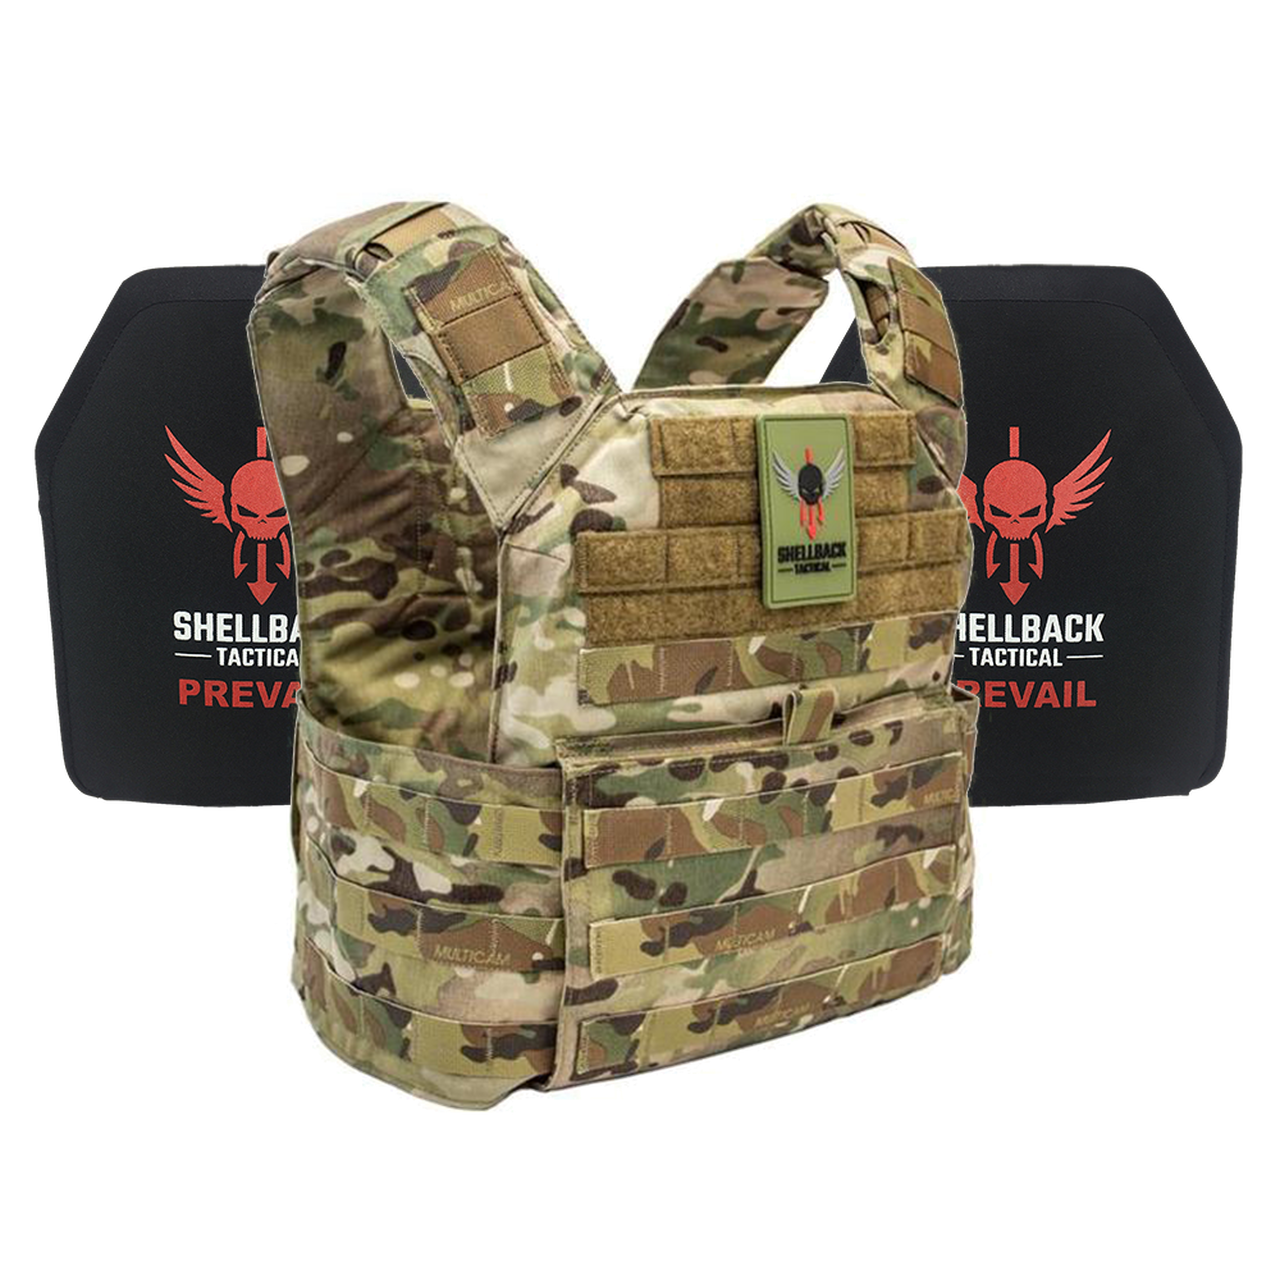 A Shellback Tactical Banshee Active Shooter Kit with Level IV Model 1155 Armor Plates plate carrier with a Shellback Tactical Banshee Active Shooter Kit with Level IV Model 1155 Armor Plates plate.